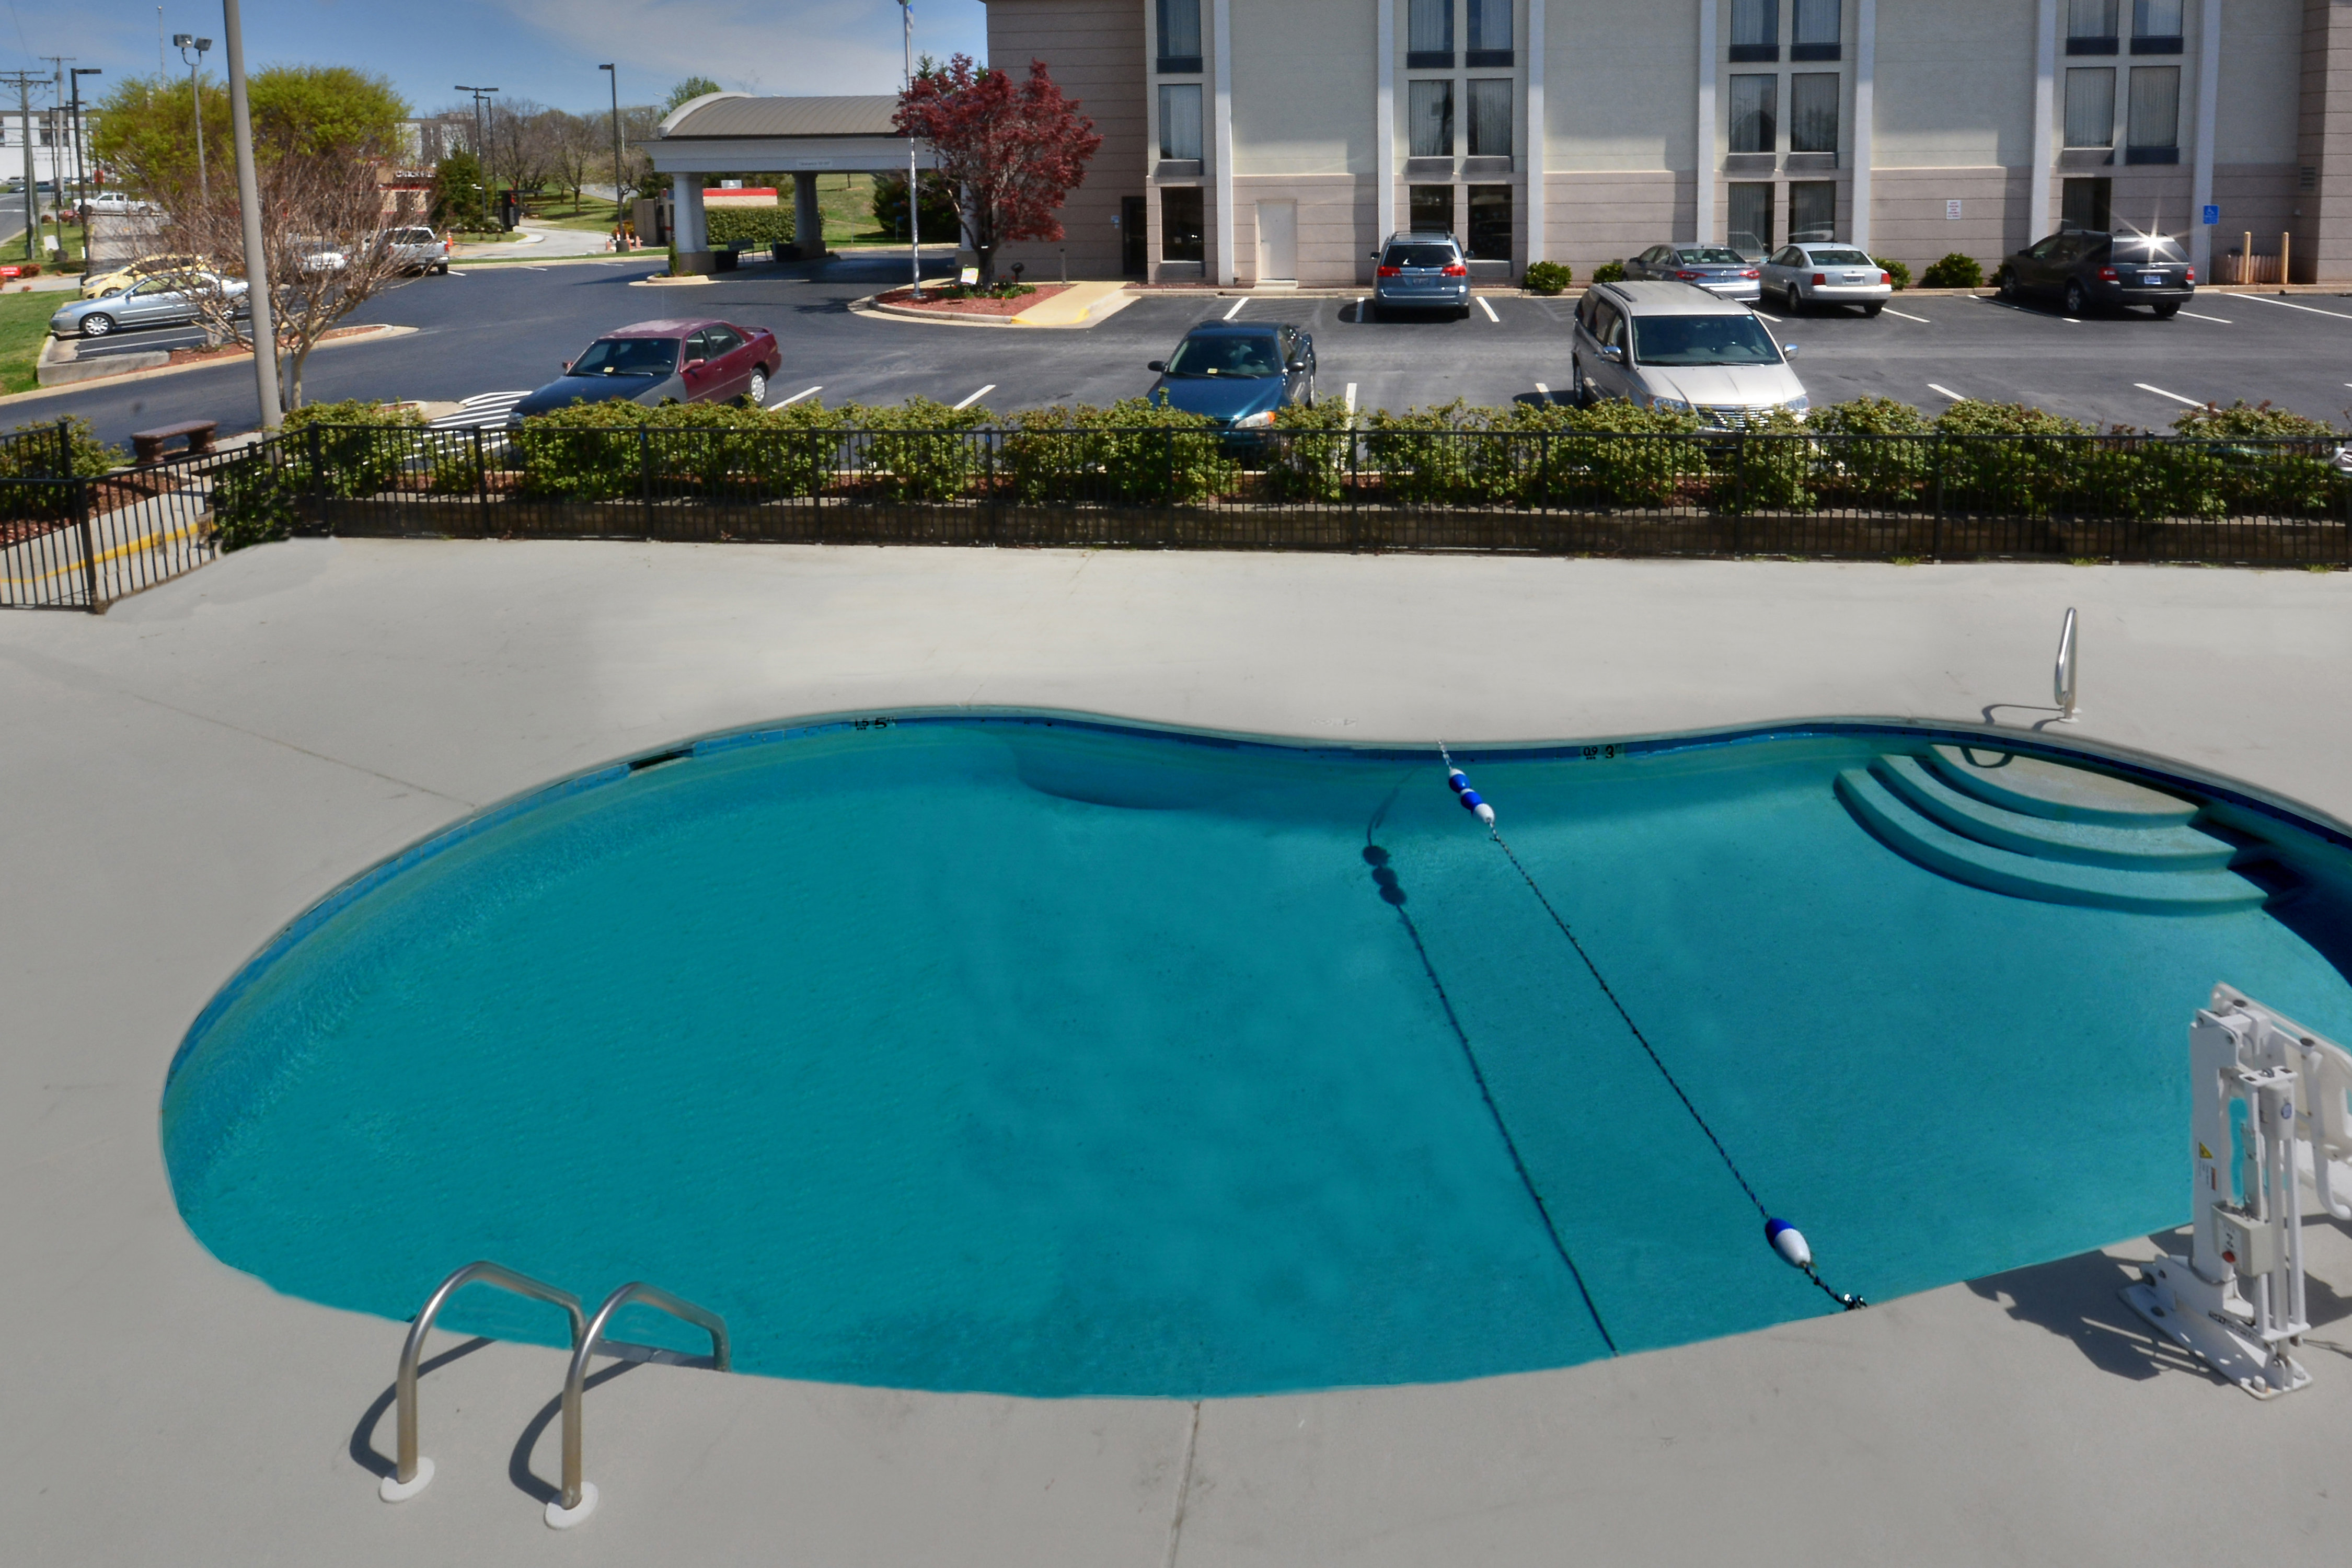 Relax in our outdoor pool before a fun day at the Snowflex Centre!